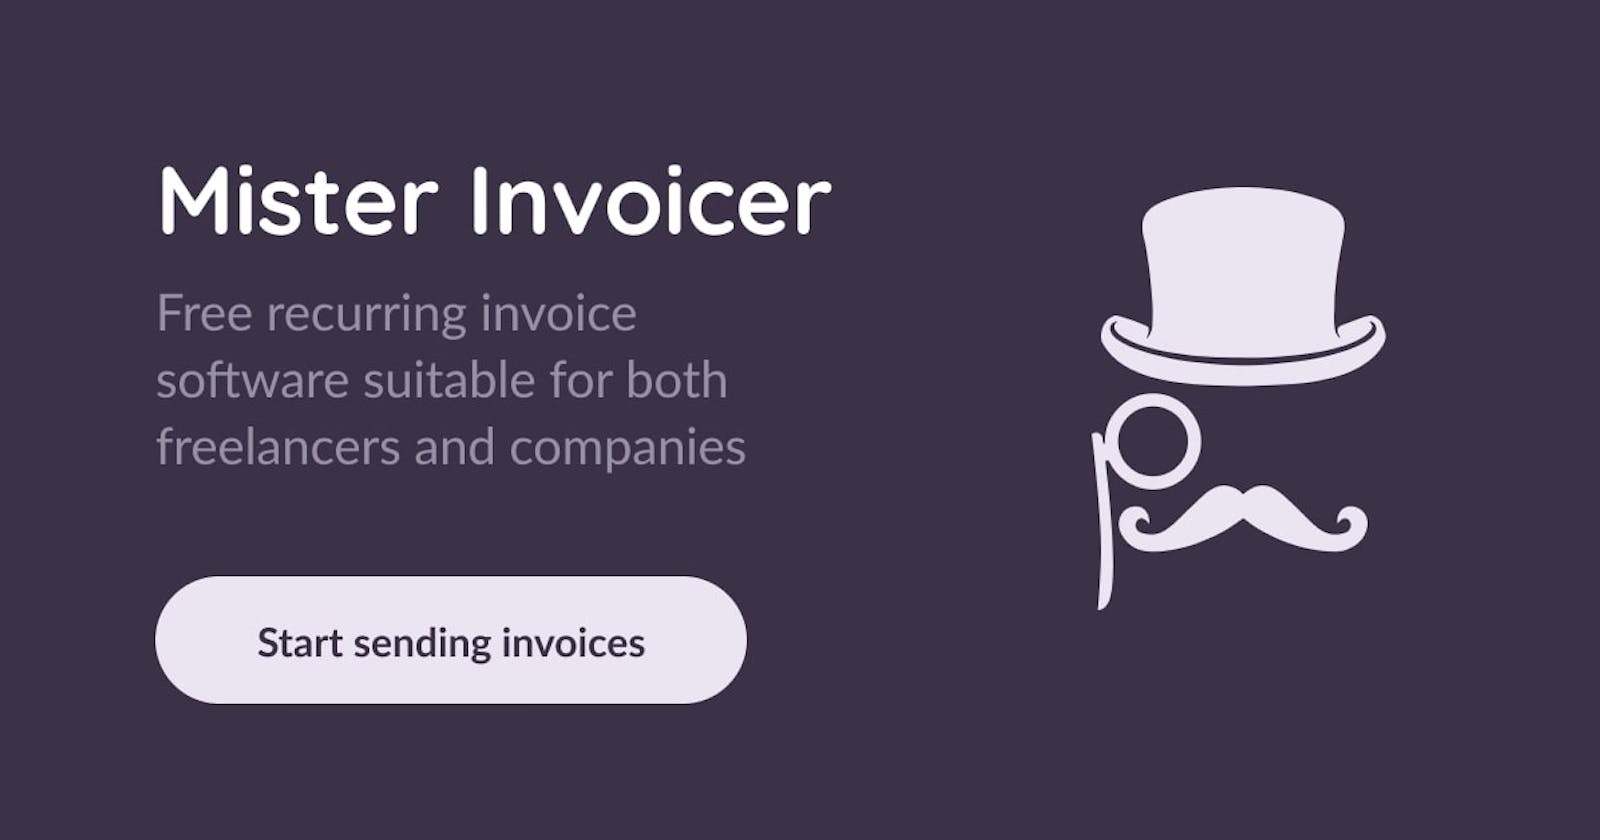 Mister Invoicer: Invoice as a Service for your business